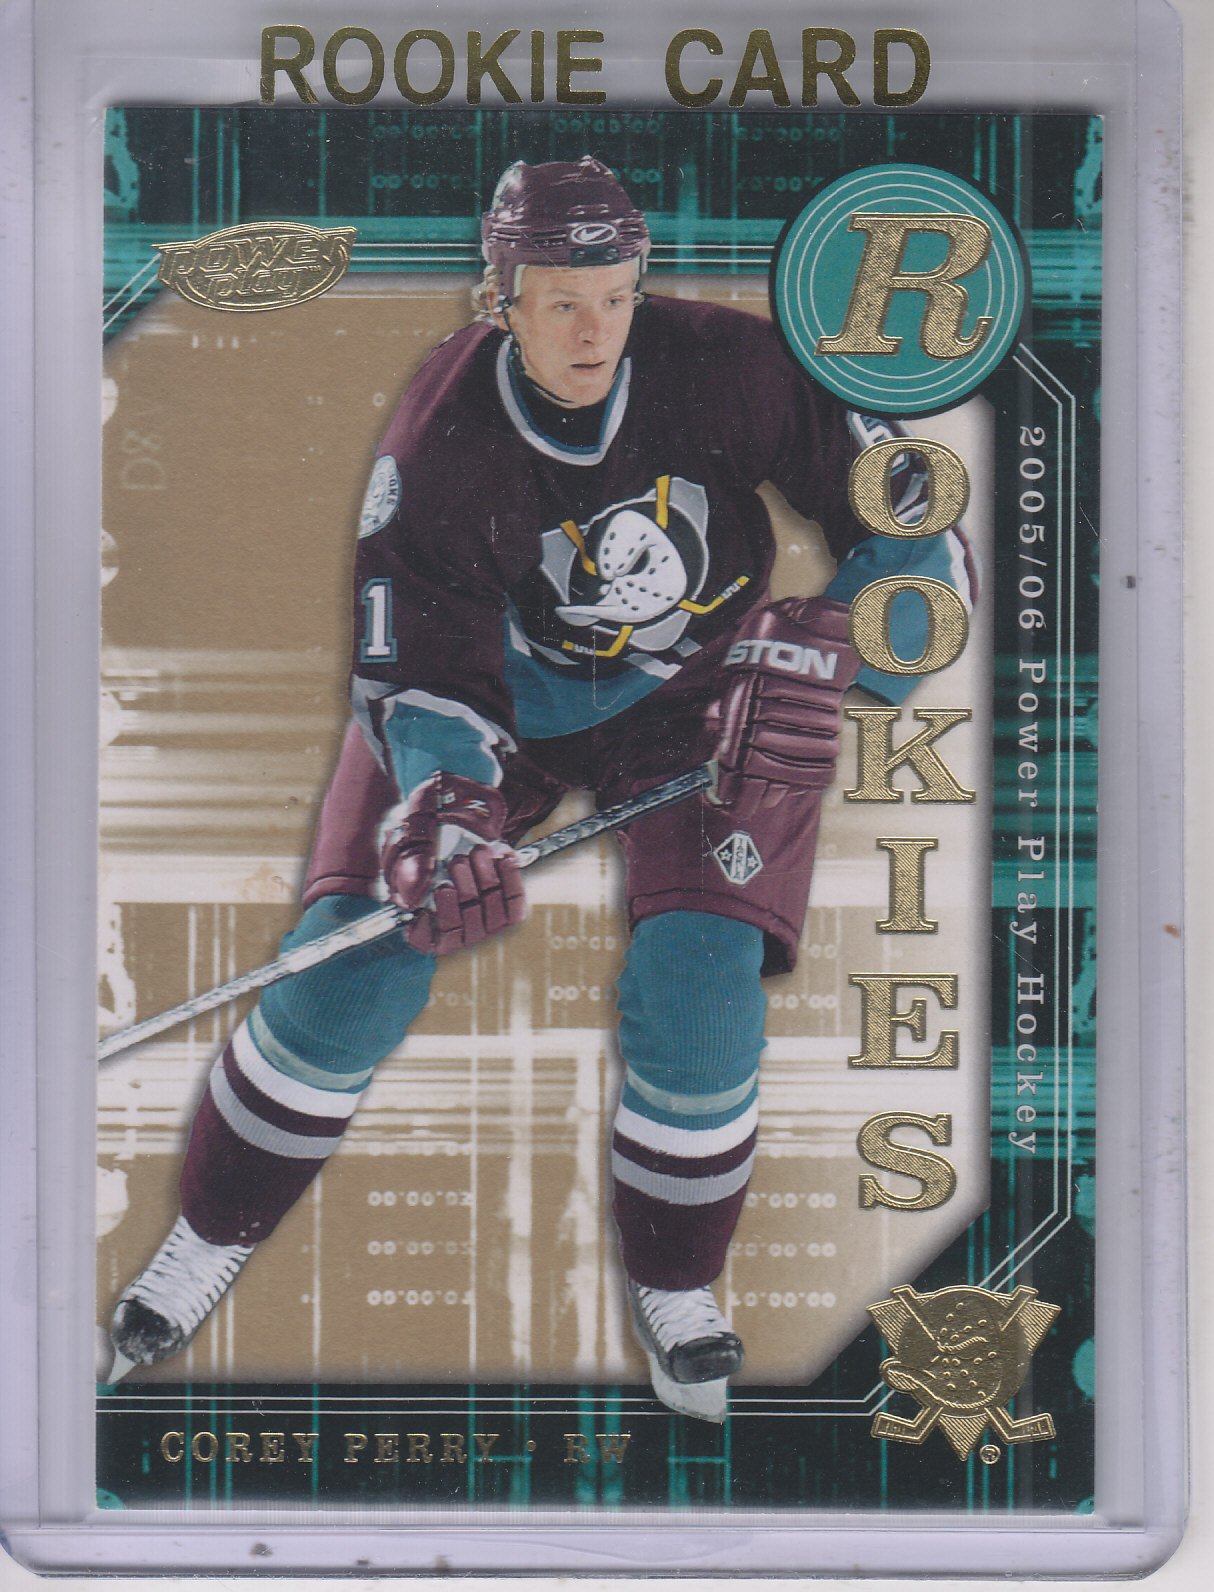 2005-06 Upper Deck Power Play #153 Corey Perry RC